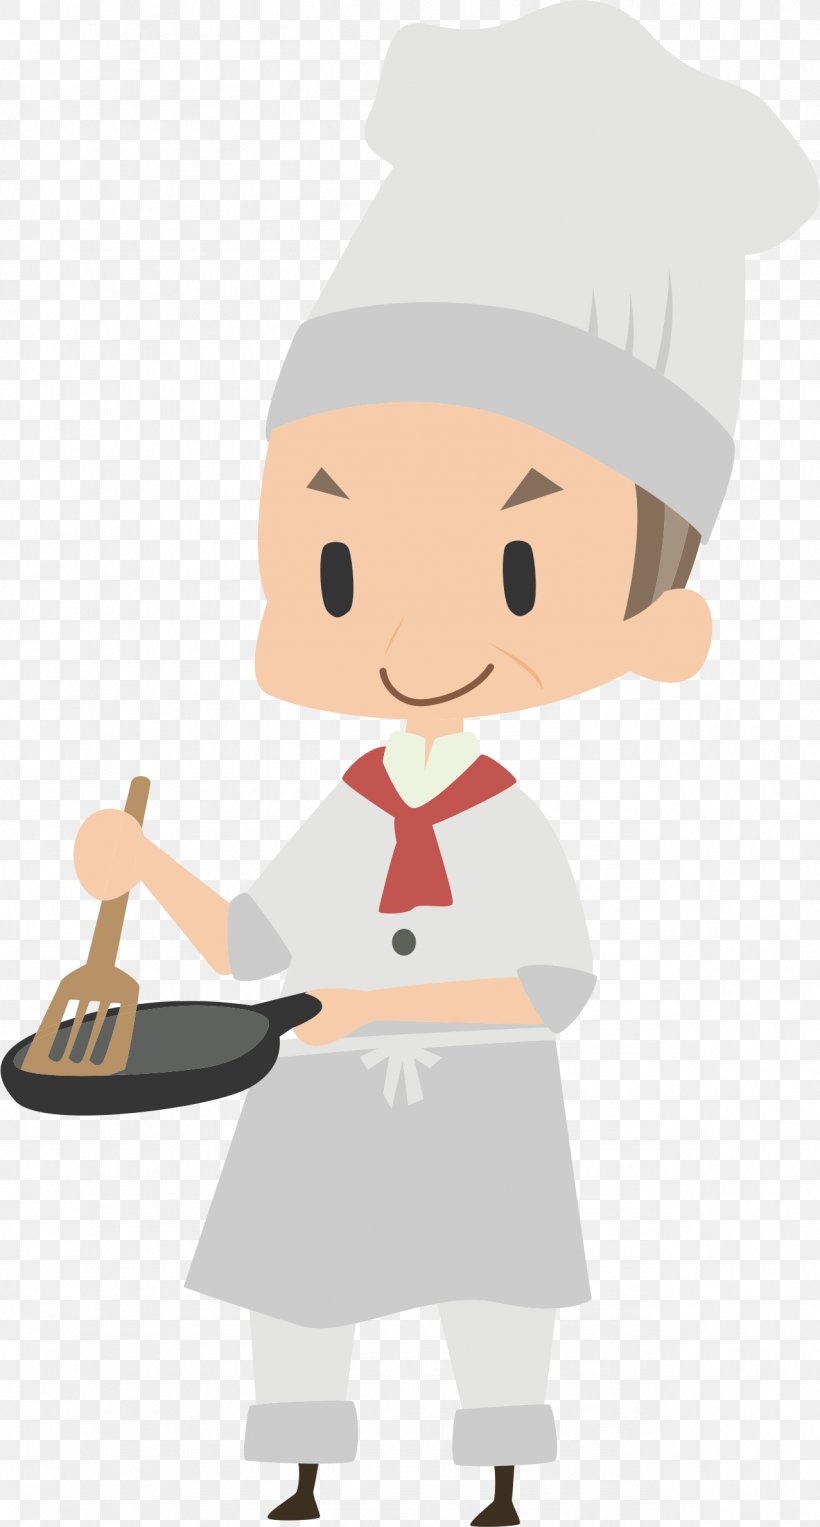 Barbecue Clip Art Chef Cooking, PNG, 1277x2379px, Barbecue, Art, Boy, Cartoon, Chef Download Free